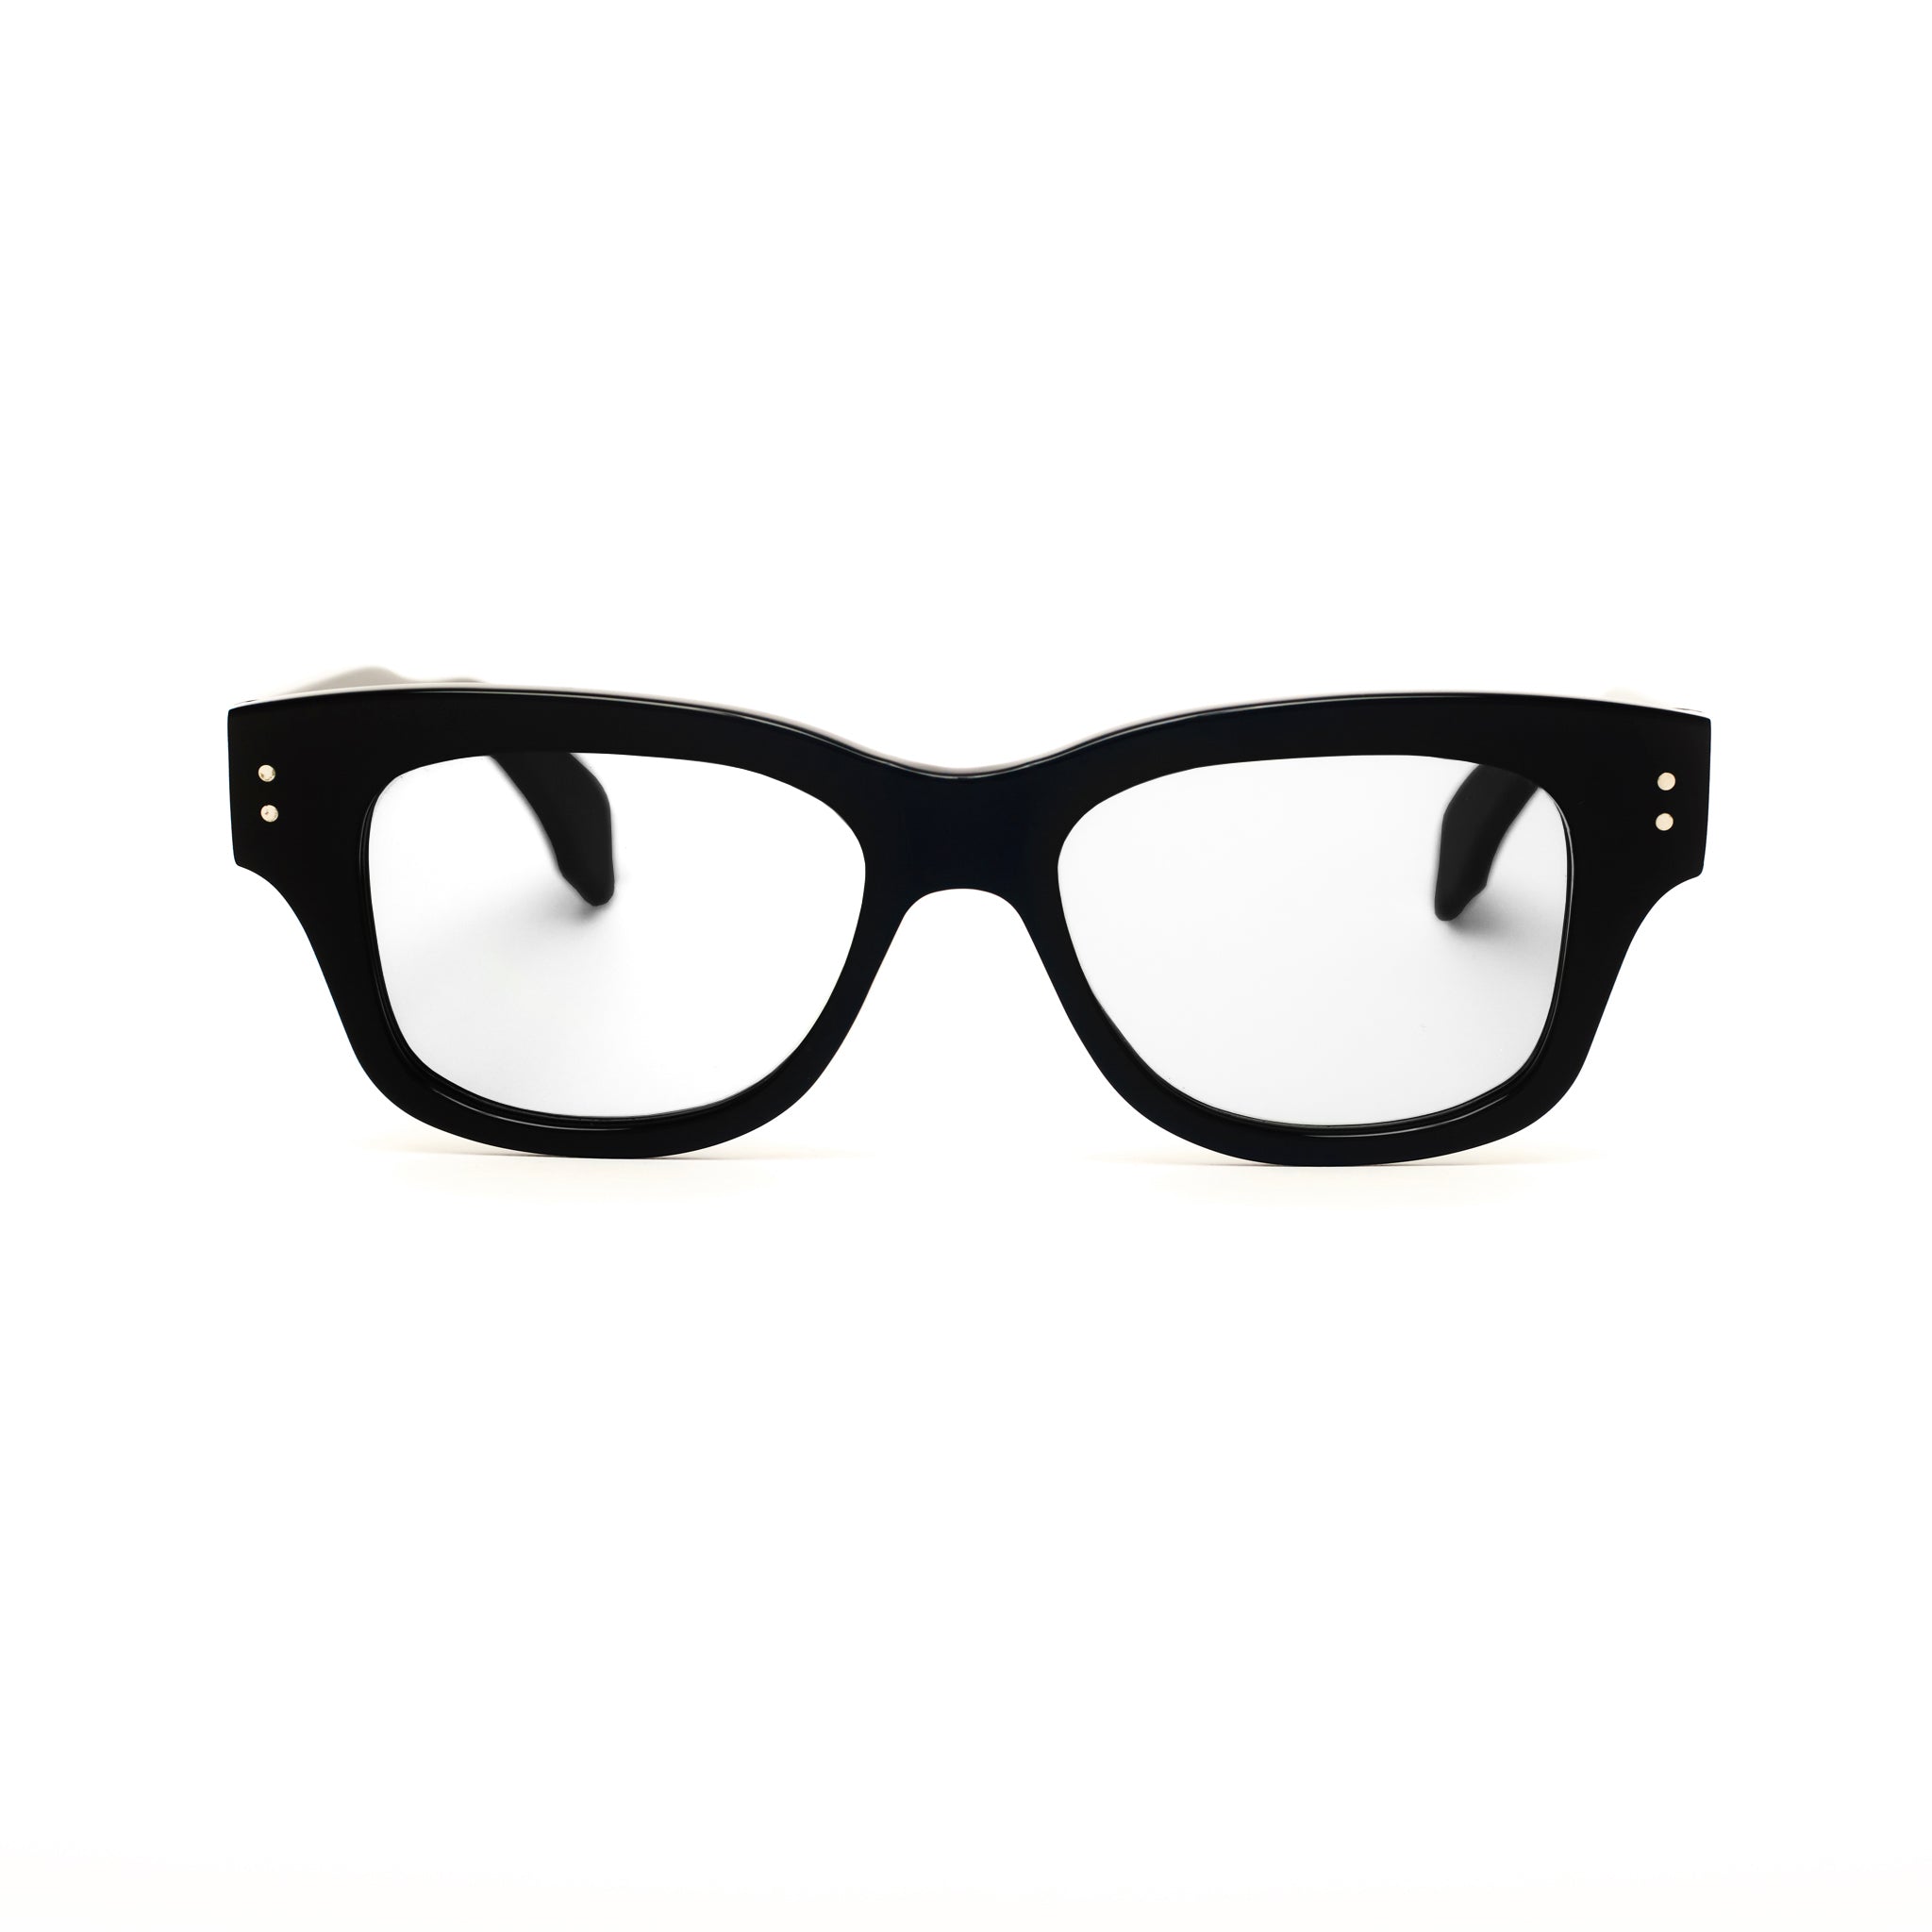 Ameos Forever collection Rio optical glasses. Black frames and unisex eyewear.